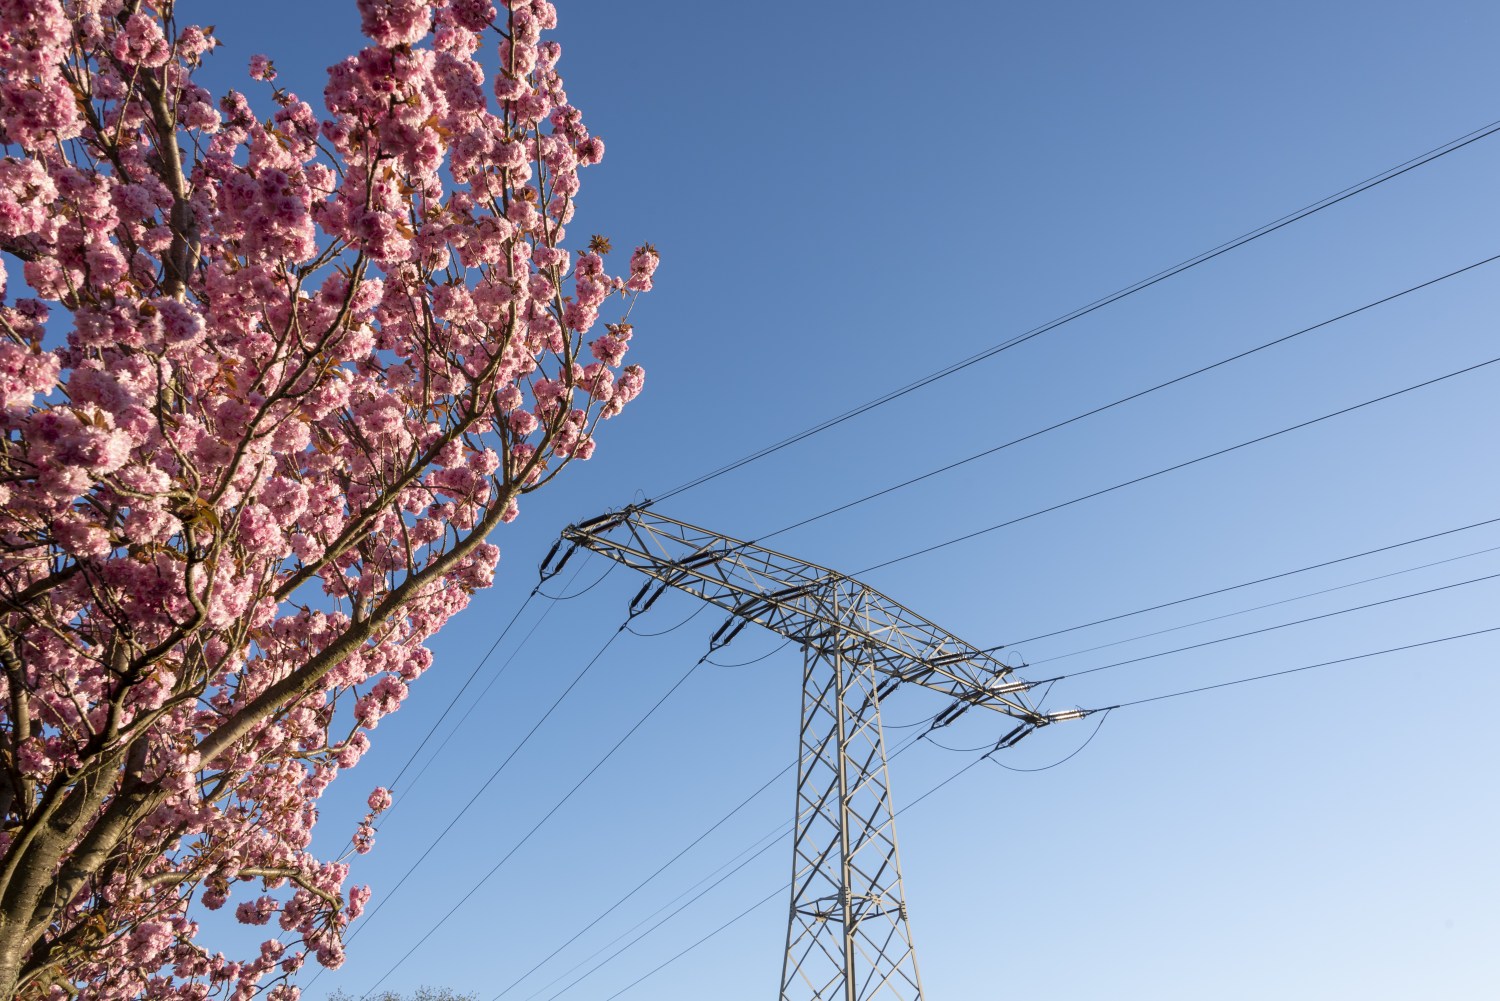 19 April 2020, Saxony-Anhalt, Magdeburg: A Japanese ornamental cherry blossoms on the Holzweg in Magdeburg. Next to it stands a large power pole. Photo: Stephan Schulz/dpa-Zentralbild/ZB